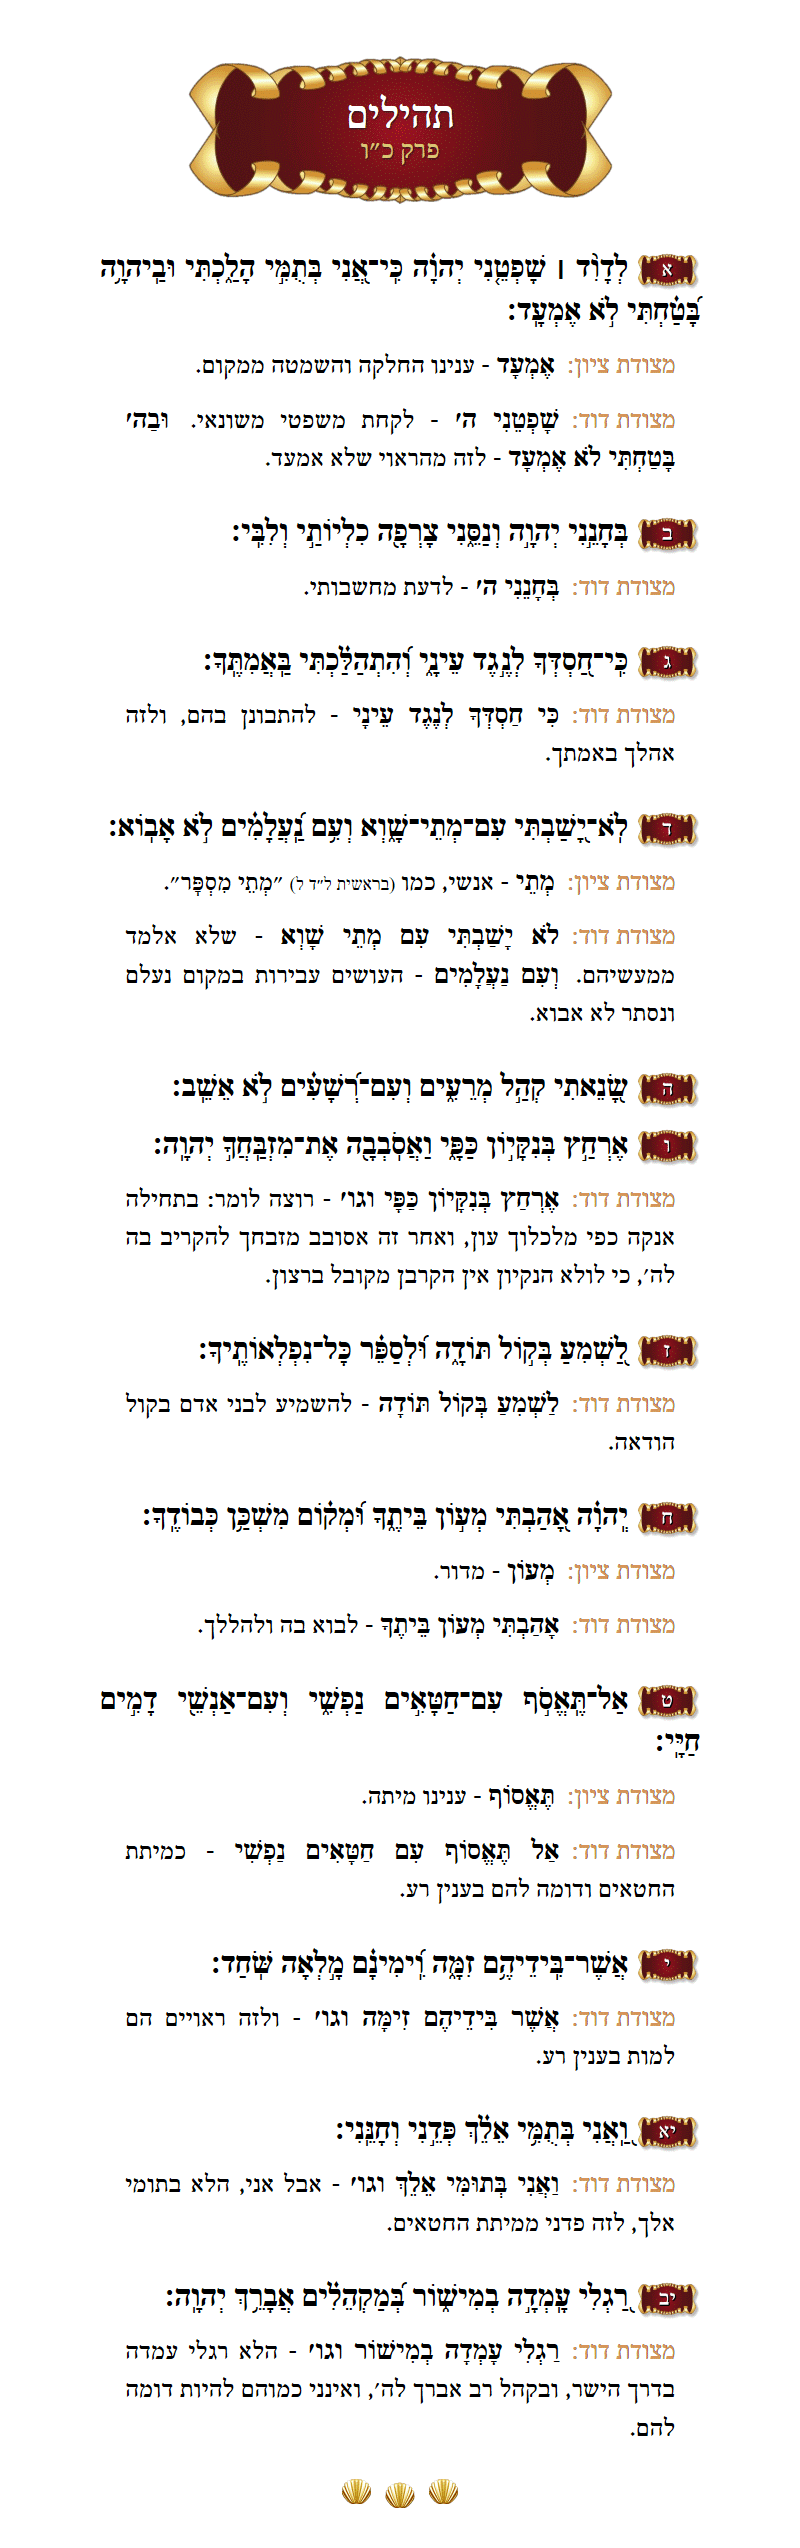 Sefer Tehillim Chapter 62 with commentary